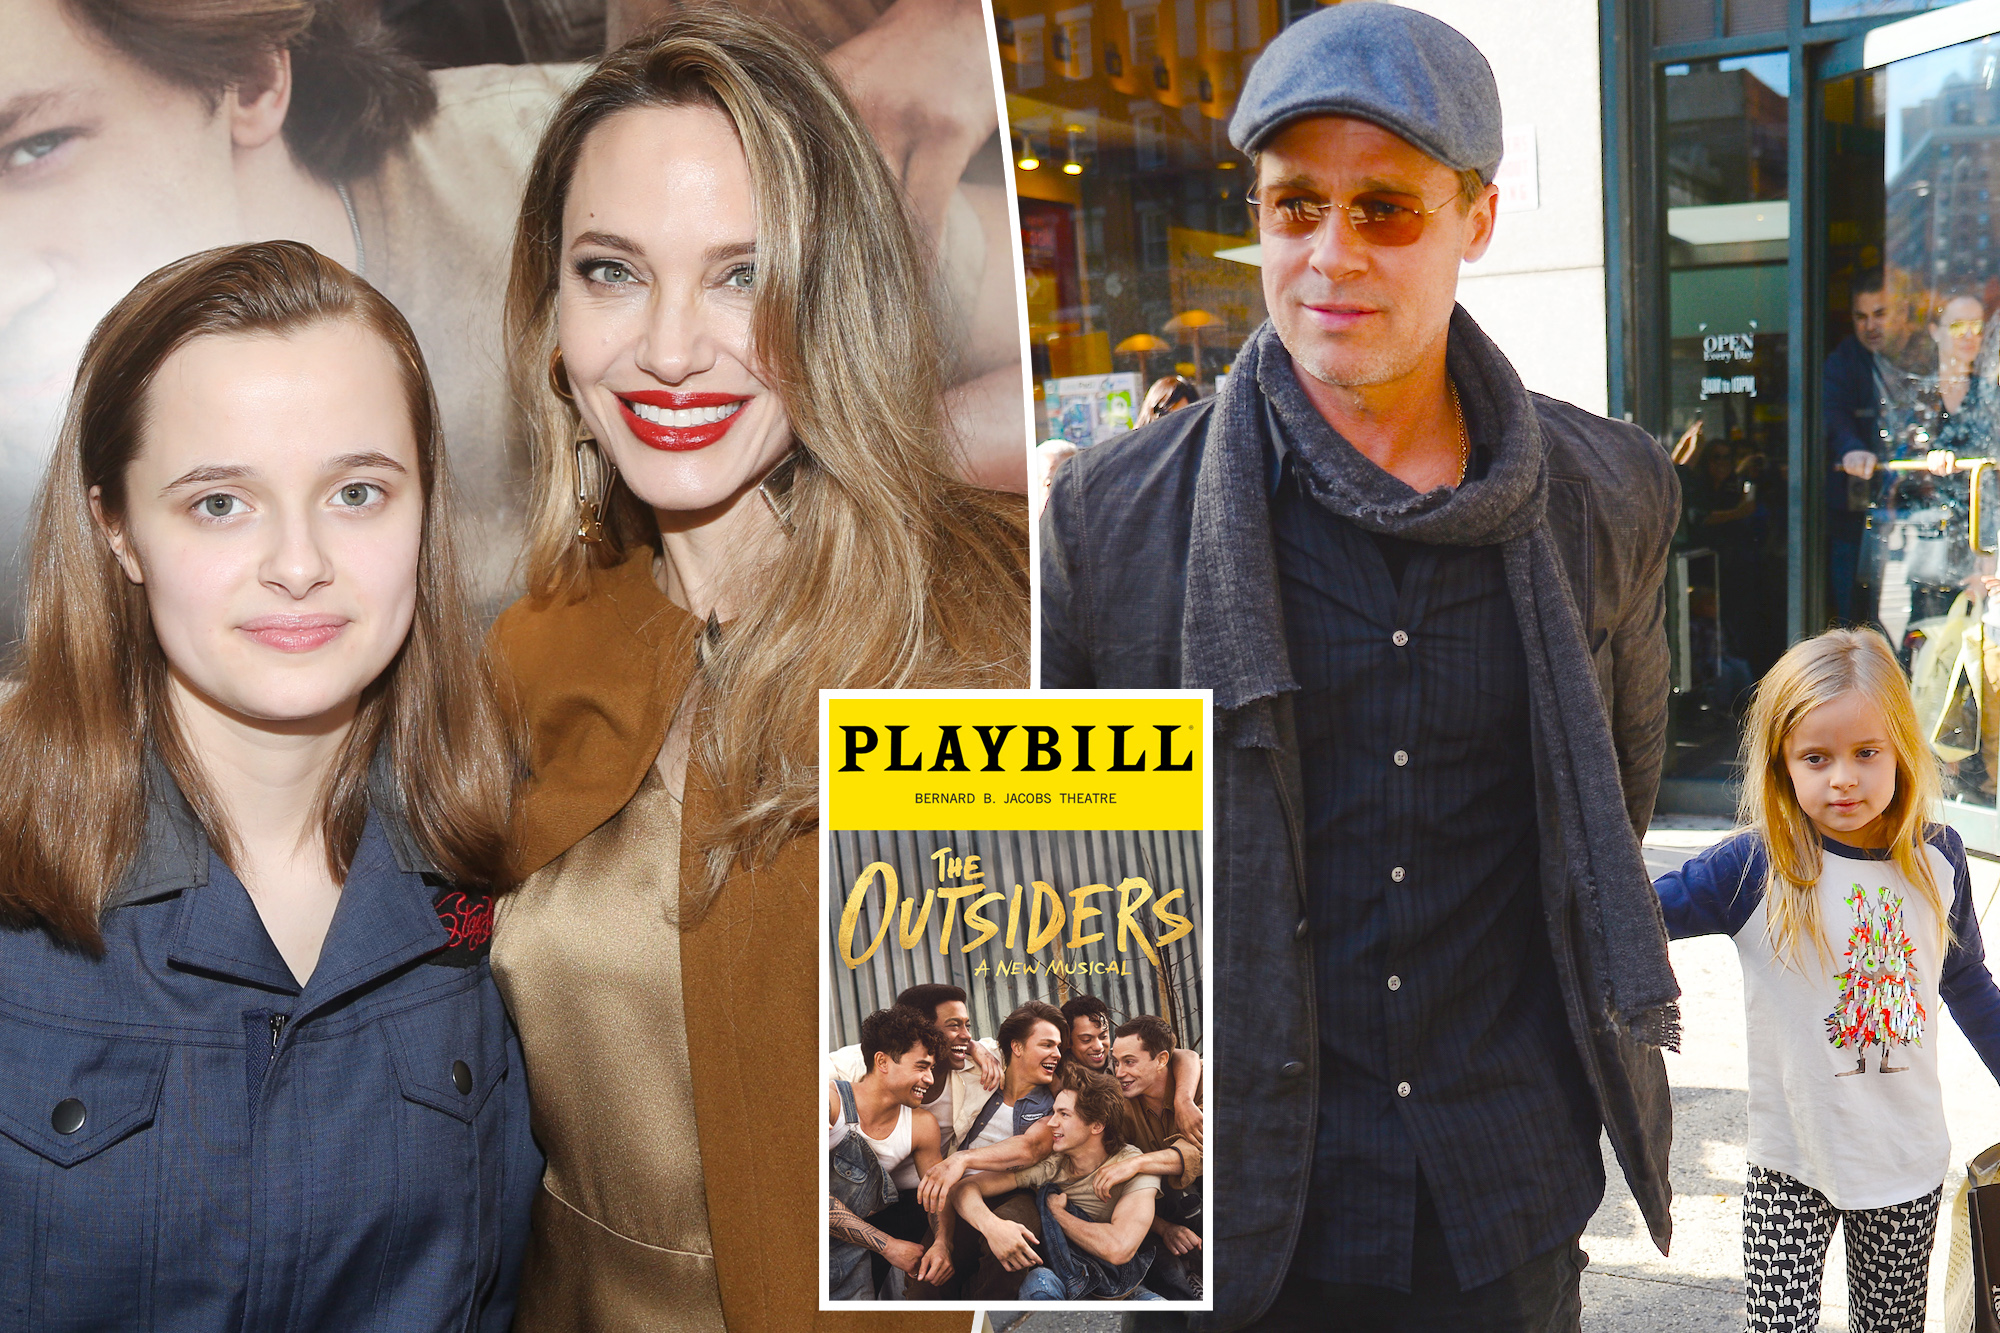 Angelina Jolie and Brad Pitt’s Daughter Vivienne Makes a Bold Move in ‘The Outsiders’ Playbill